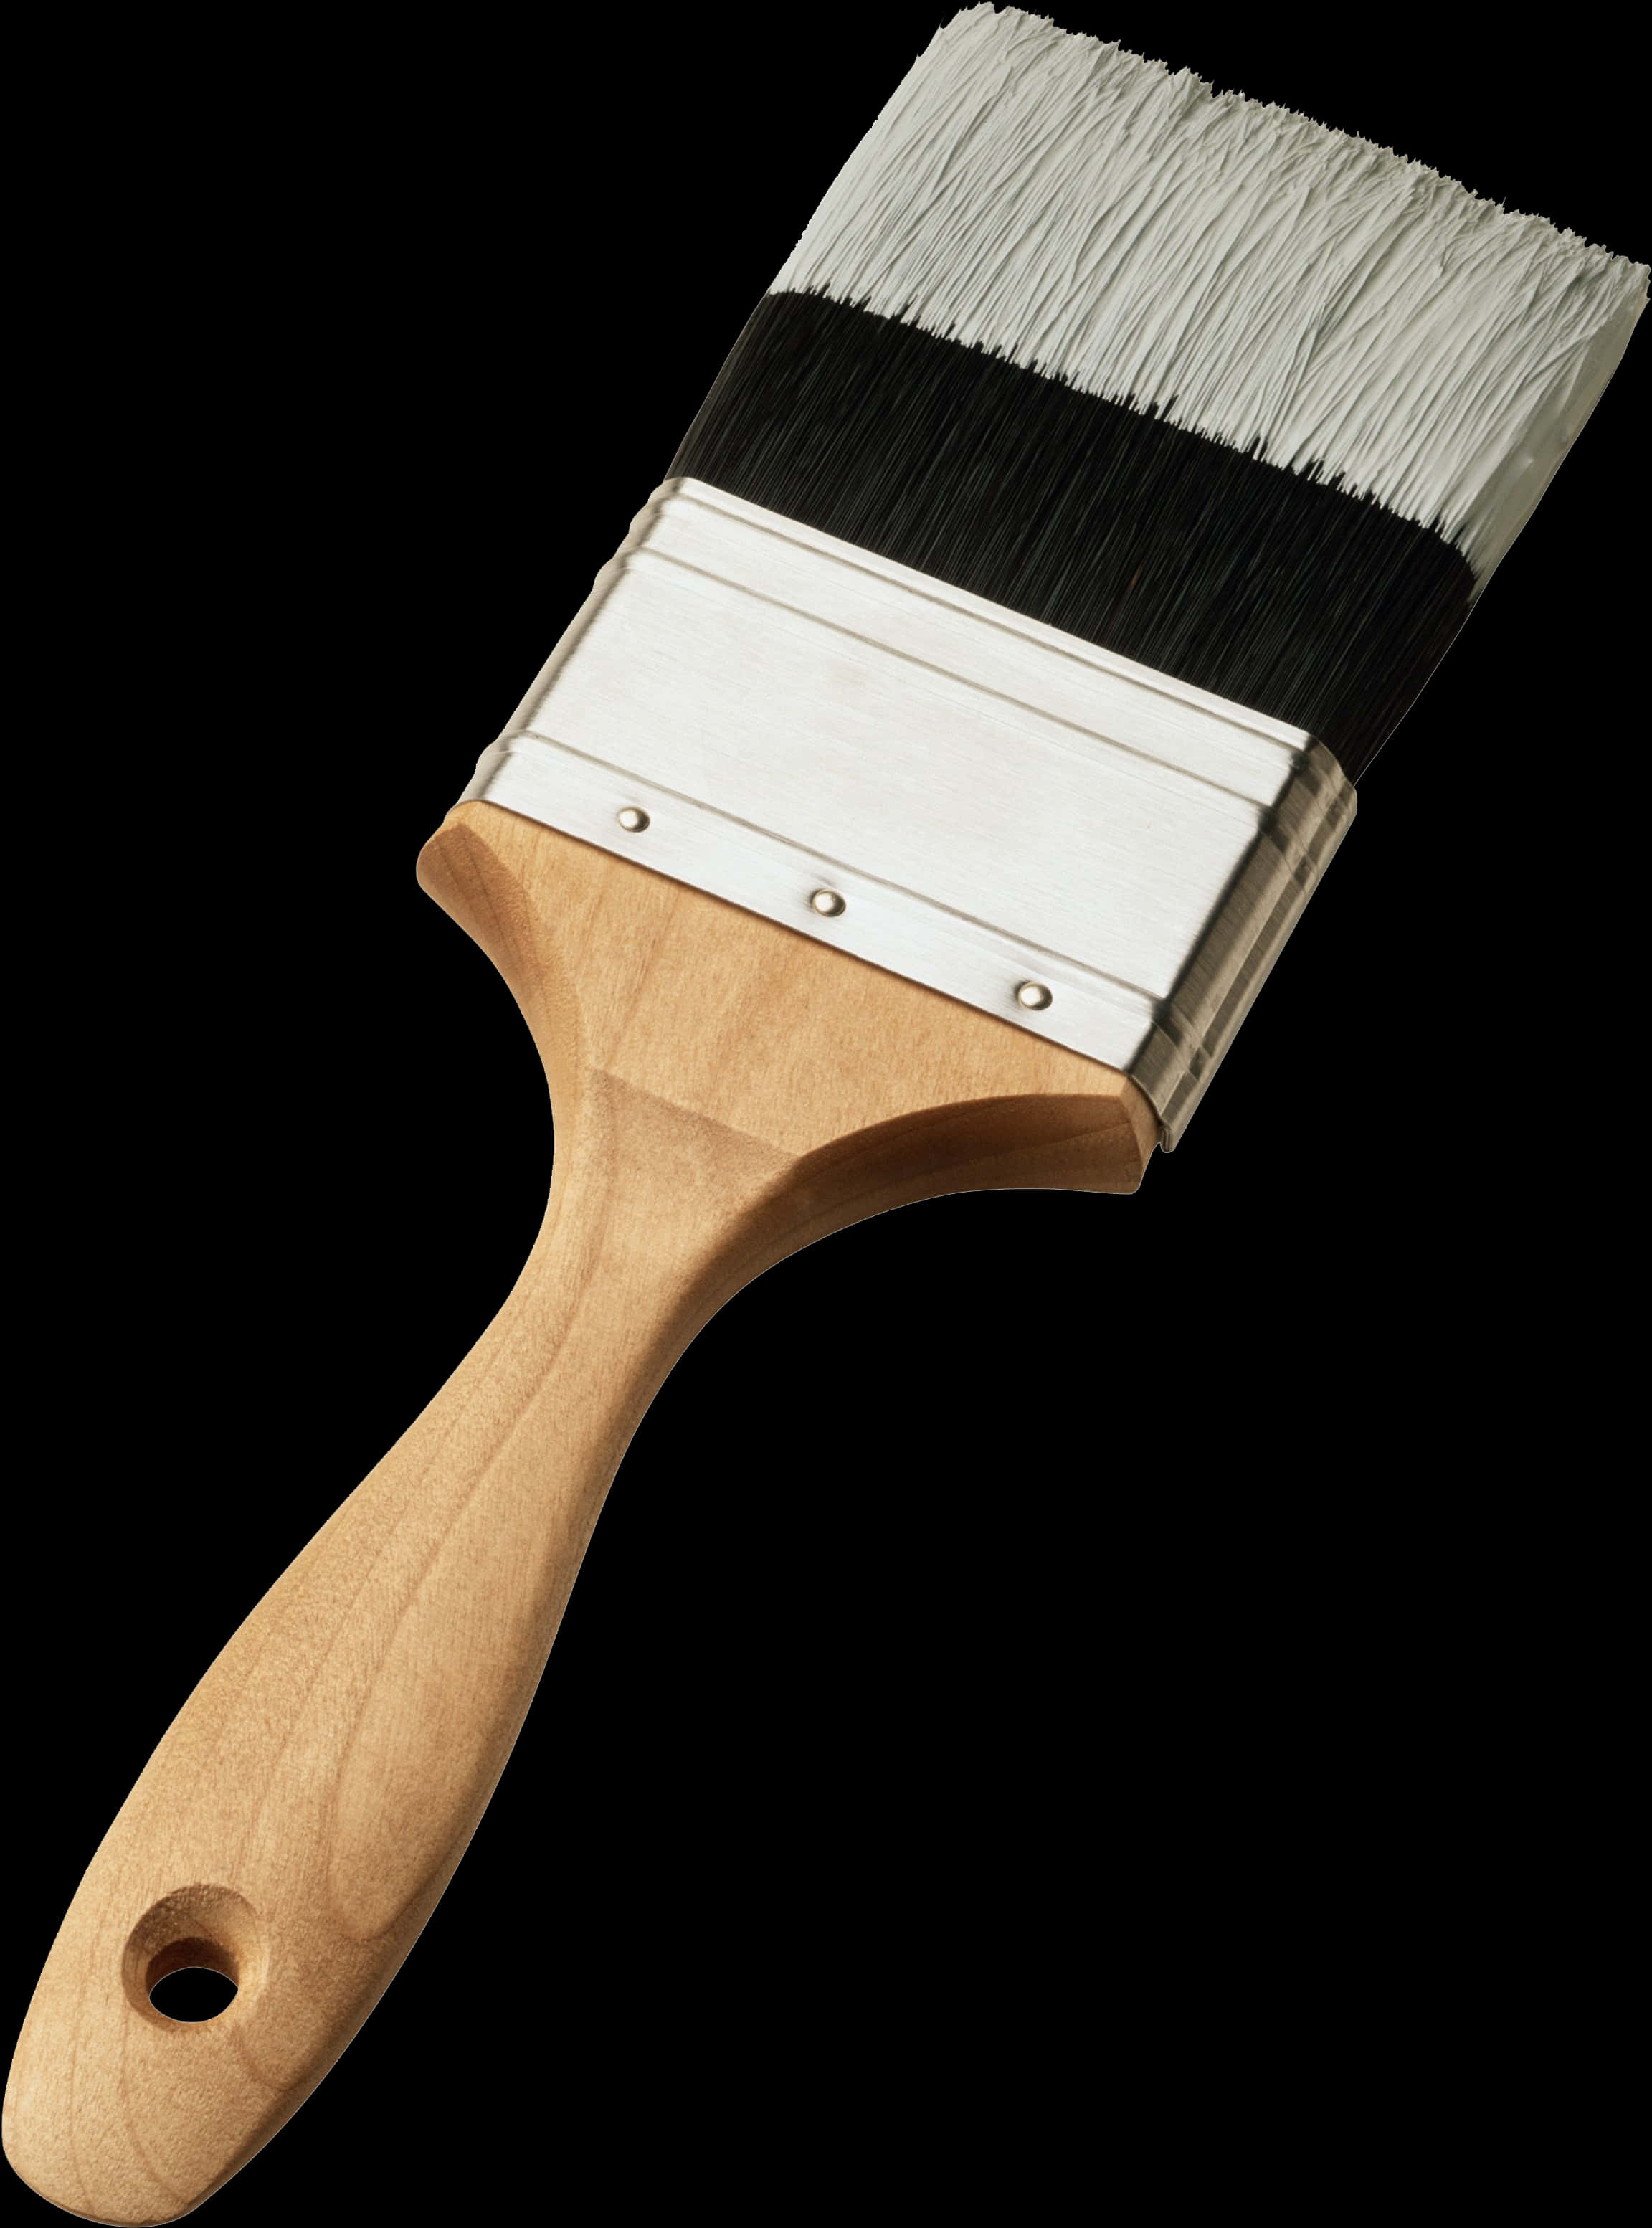 A Paint Brush With A Wooden Handle